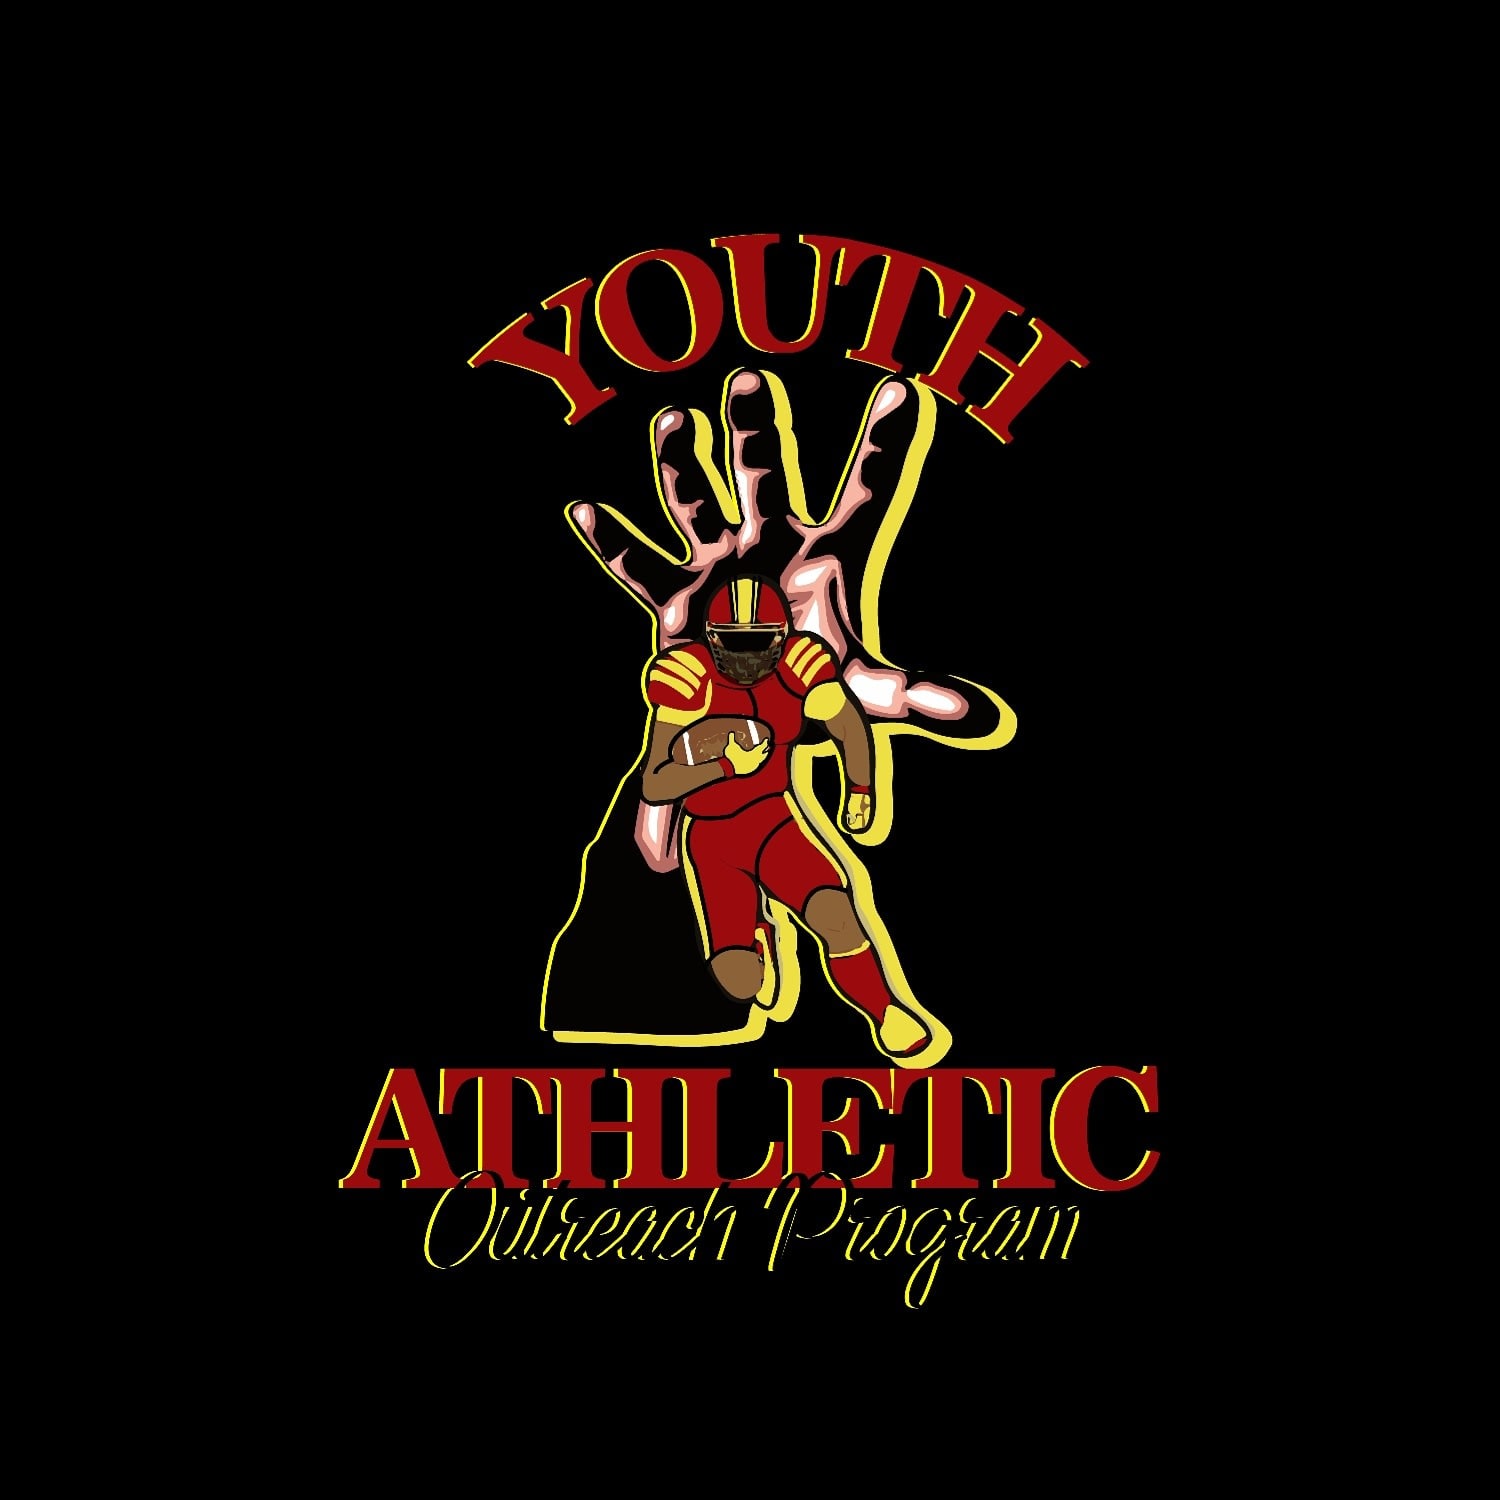 Youth Athletic Outreach Program